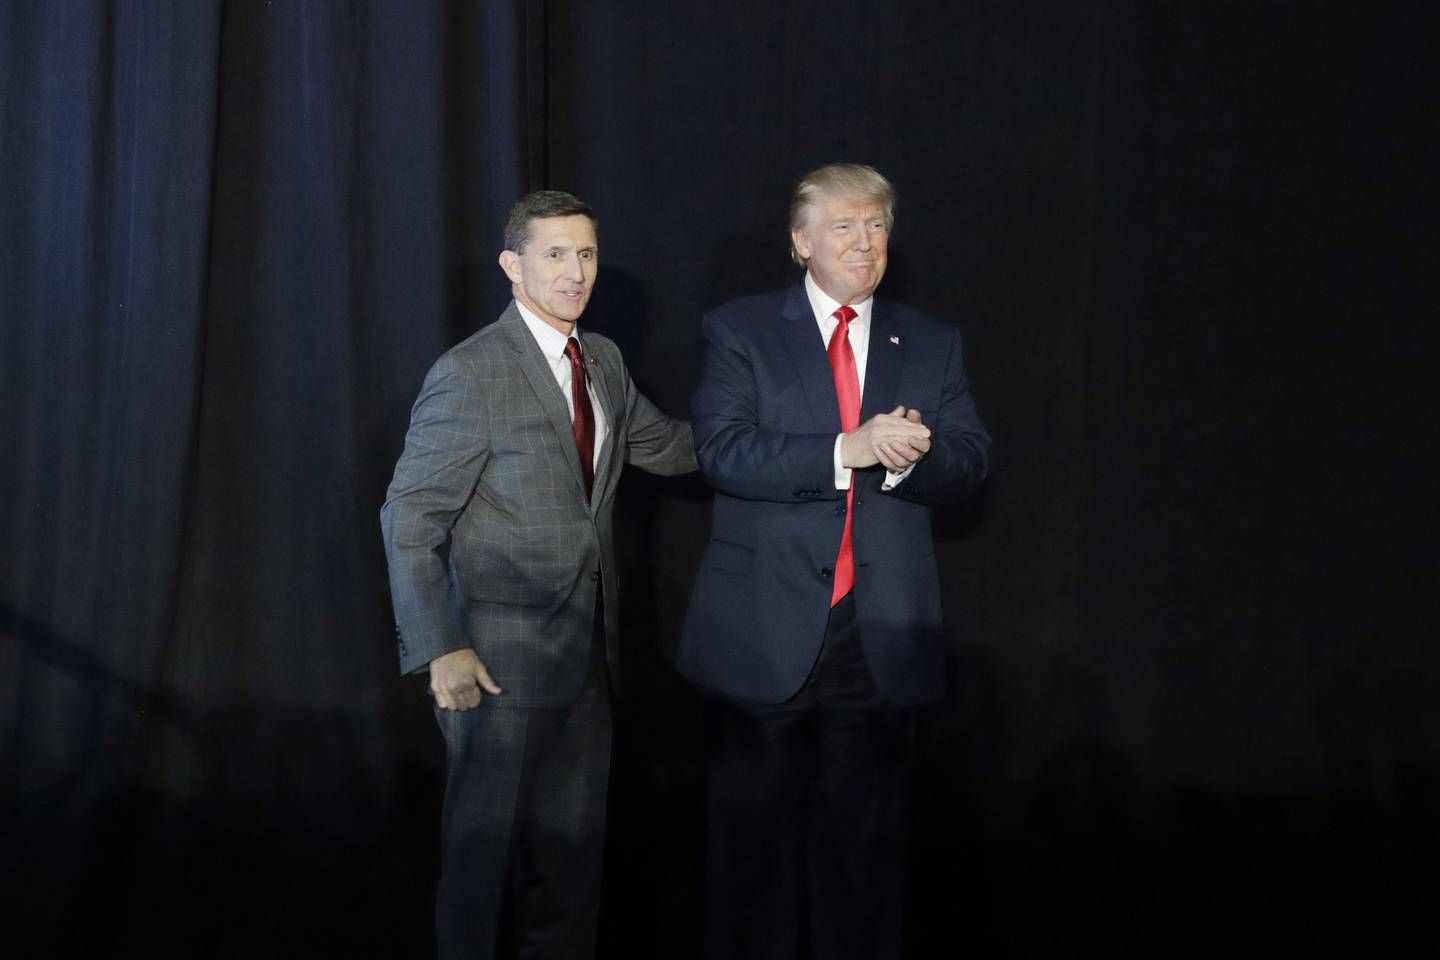 Retired Lt. Gen. Michael Flynn, left, introduces Republican presidential candidate Donald Trump at a campaign rally on Sept. 29, 2016, in Bedford, N.H.